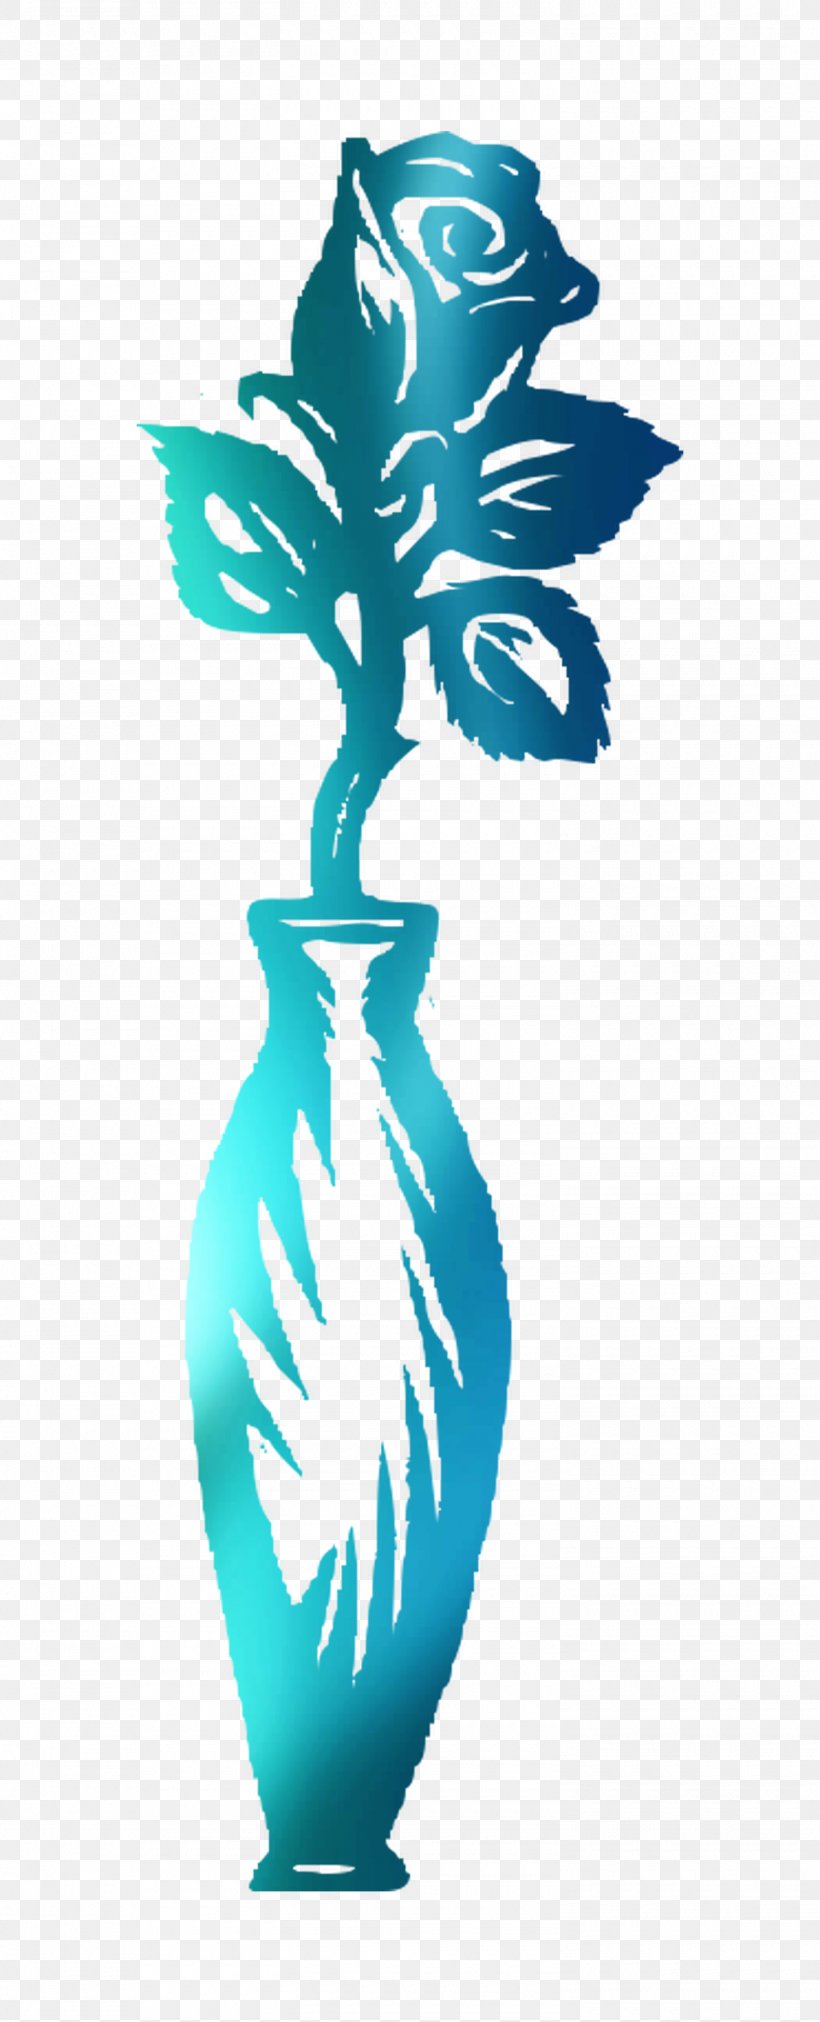 Clip Art Tree Teal, PNG, 1500x3700px, Tree, Aqua, Plant, Teal, Turquoise Download Free